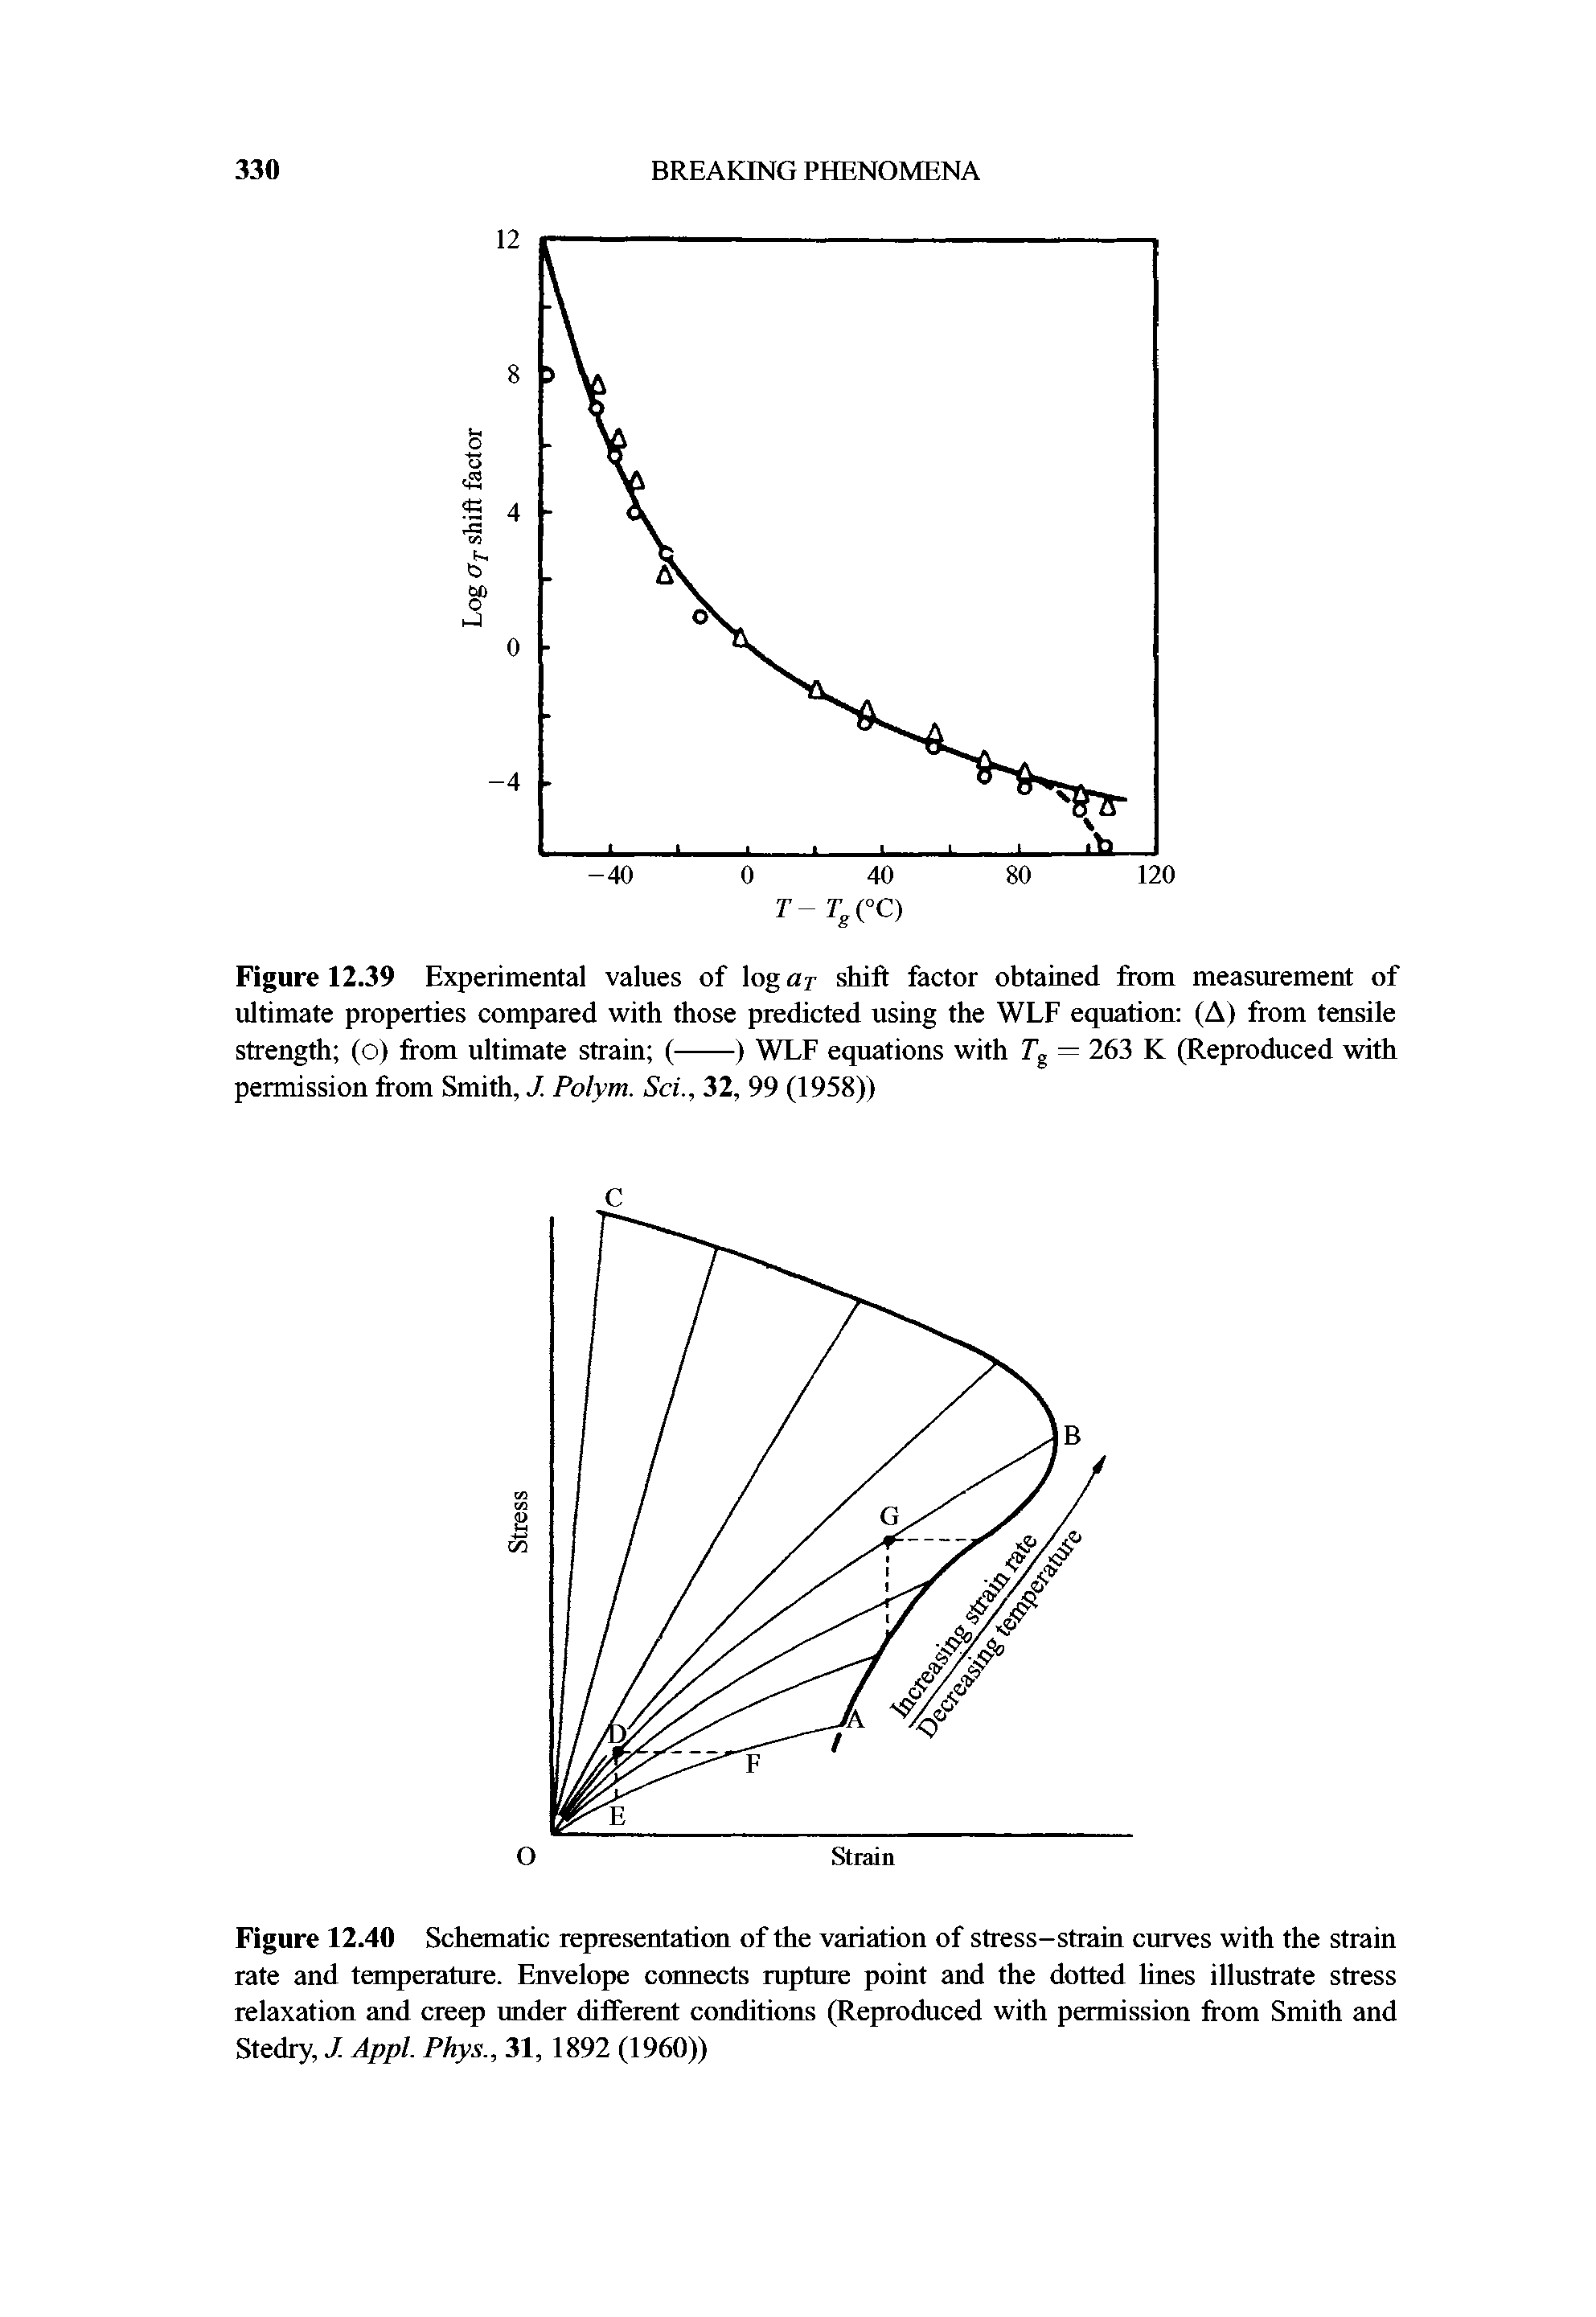 Figure 12.40 Schematic representation of the variation of stress-strain curves with the strain rate and temperature. Envelope connects rupture point and the dotted lines illustrate stress relaxation and creep under different conditions (Reproduced with permission from Smith and Stedry, J. Appl. Phys., 31, 1892 (I960))...